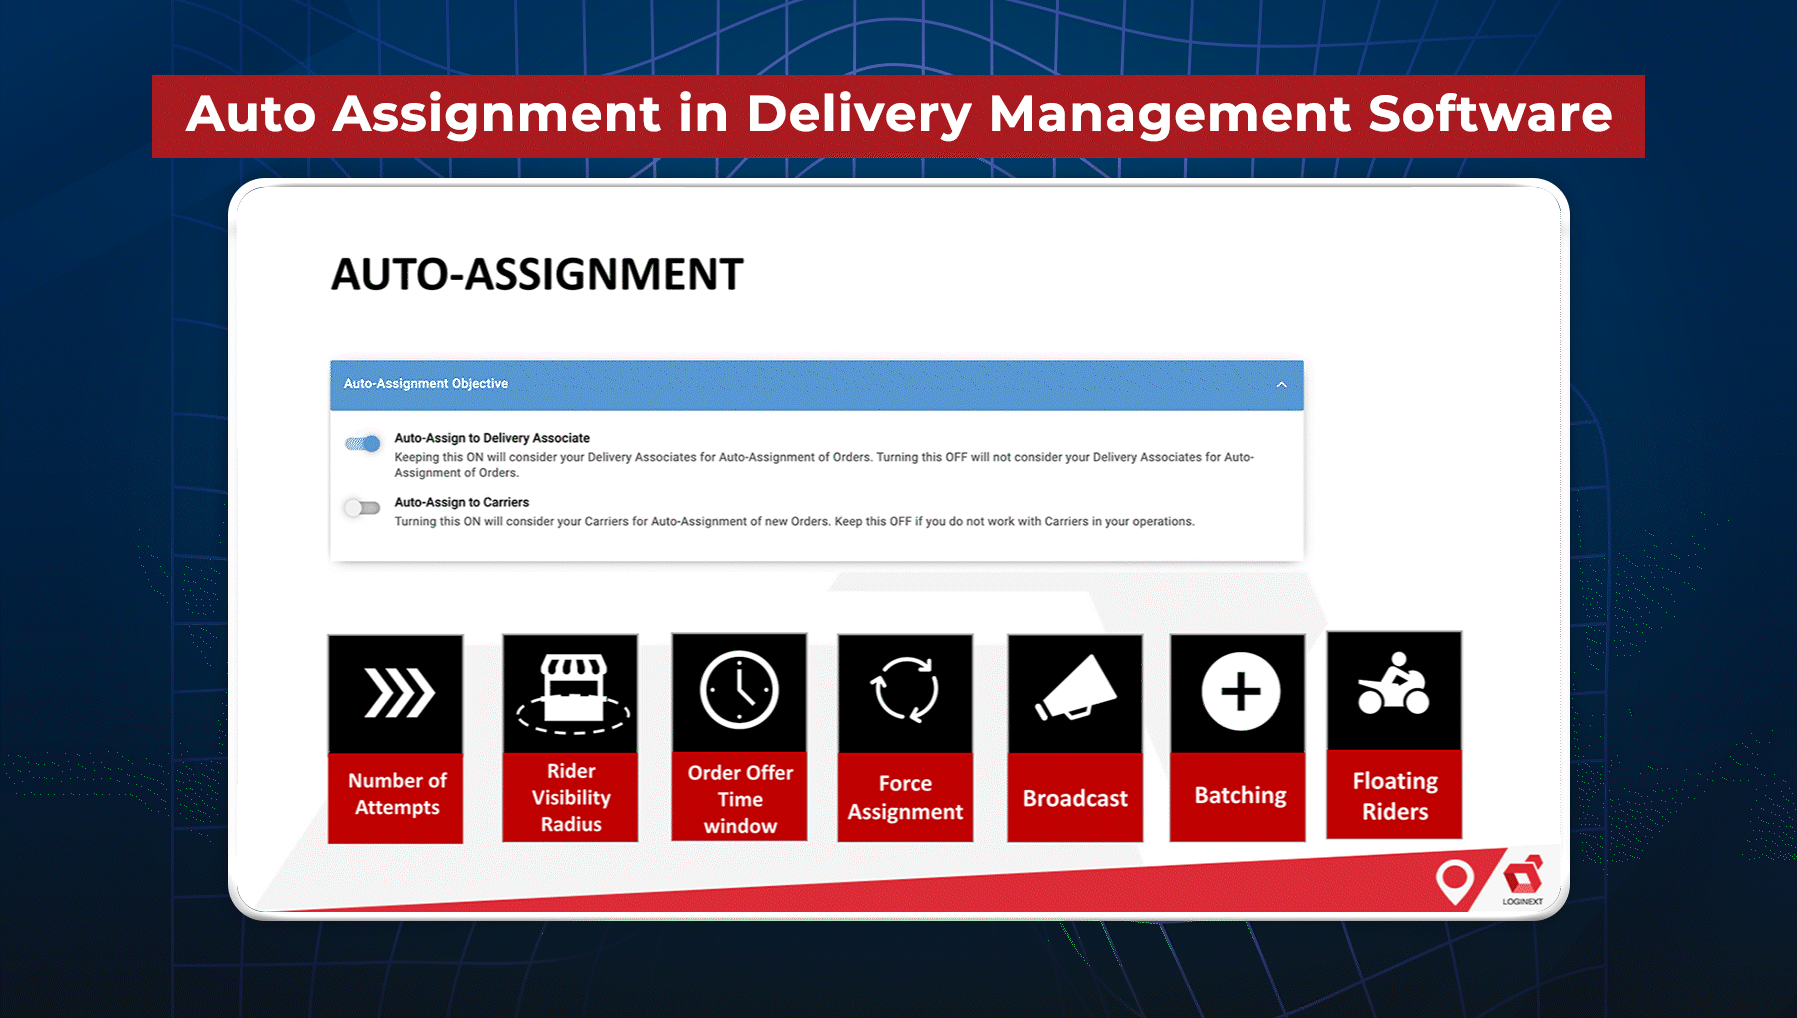 Auto Assignment in Delivery Management Software